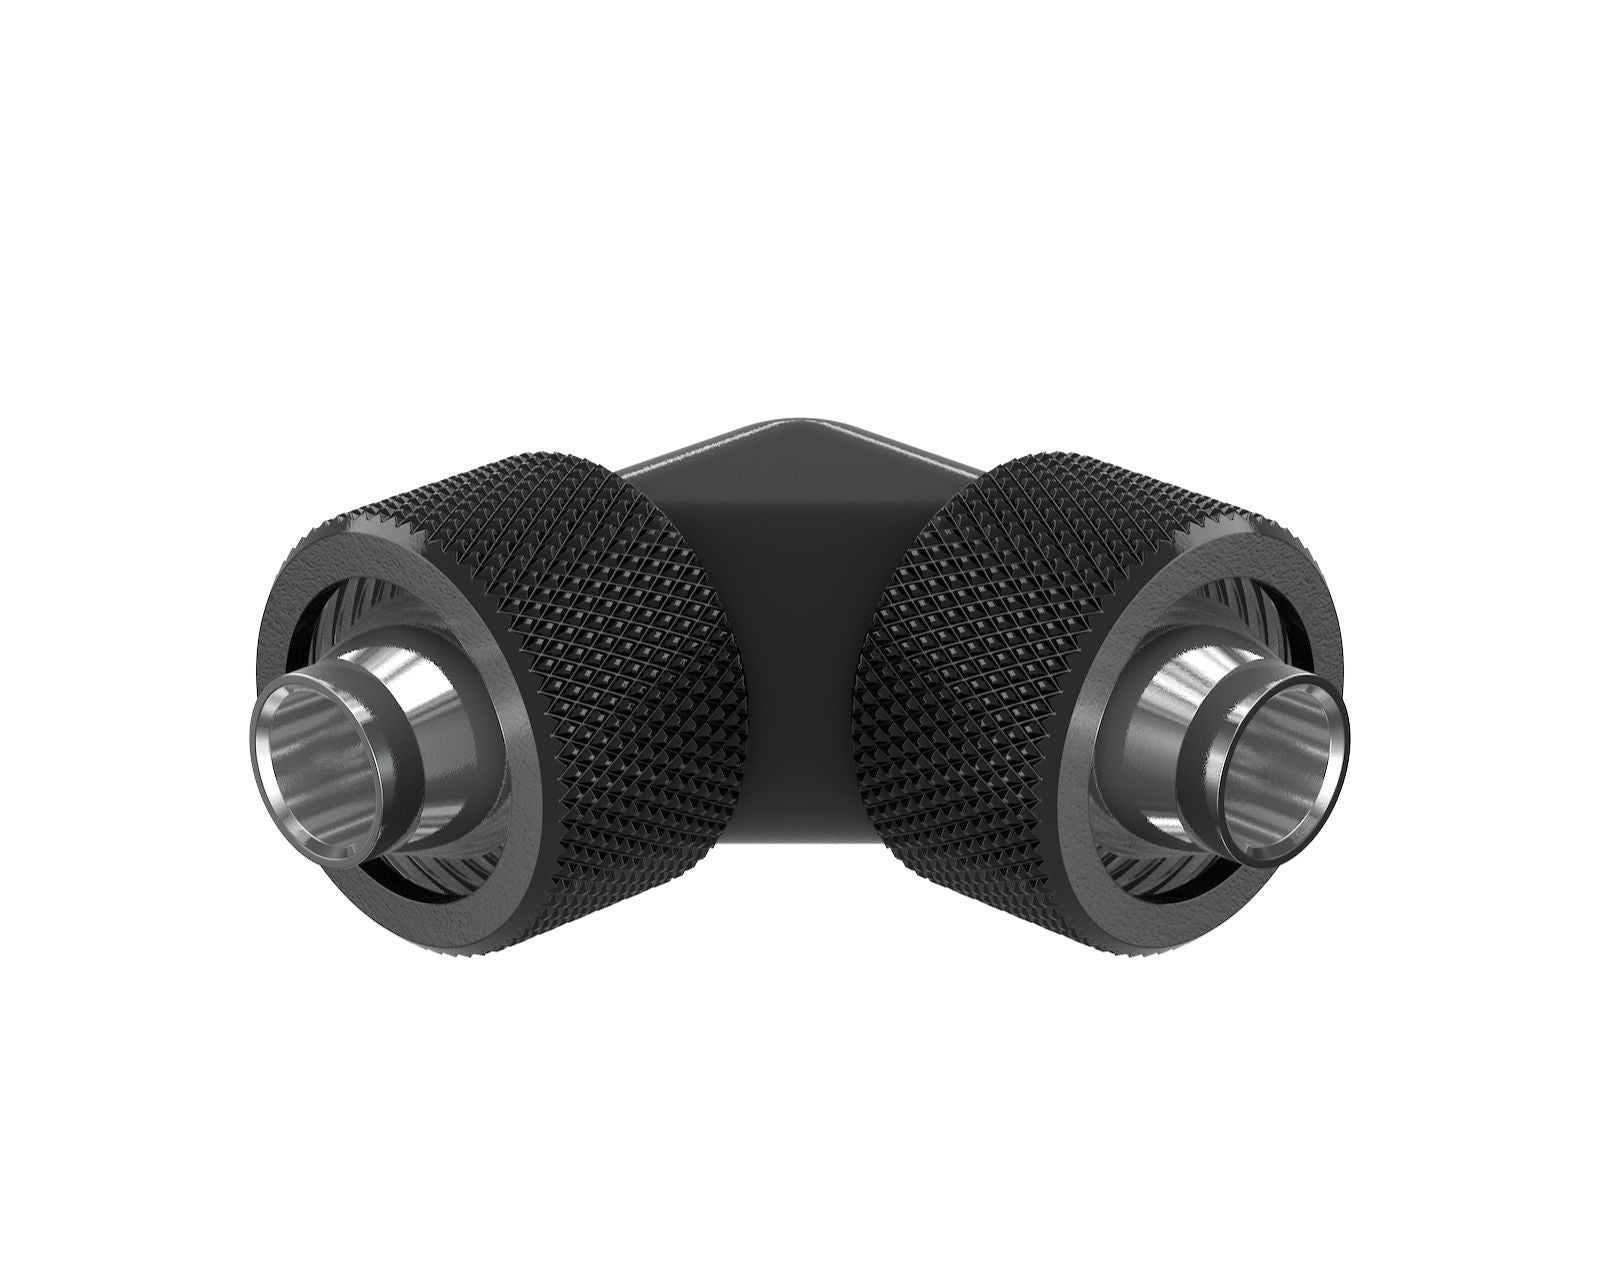 PrimoChill SecureFit SX - Premium 90 Degree Compression Fitting Set For 7/16in ID x 5/8in OD Flexible Tubing (F-SFSX75890) - Available in 20+ Colors, Custom Watercooling Loop Ready - Satin Black